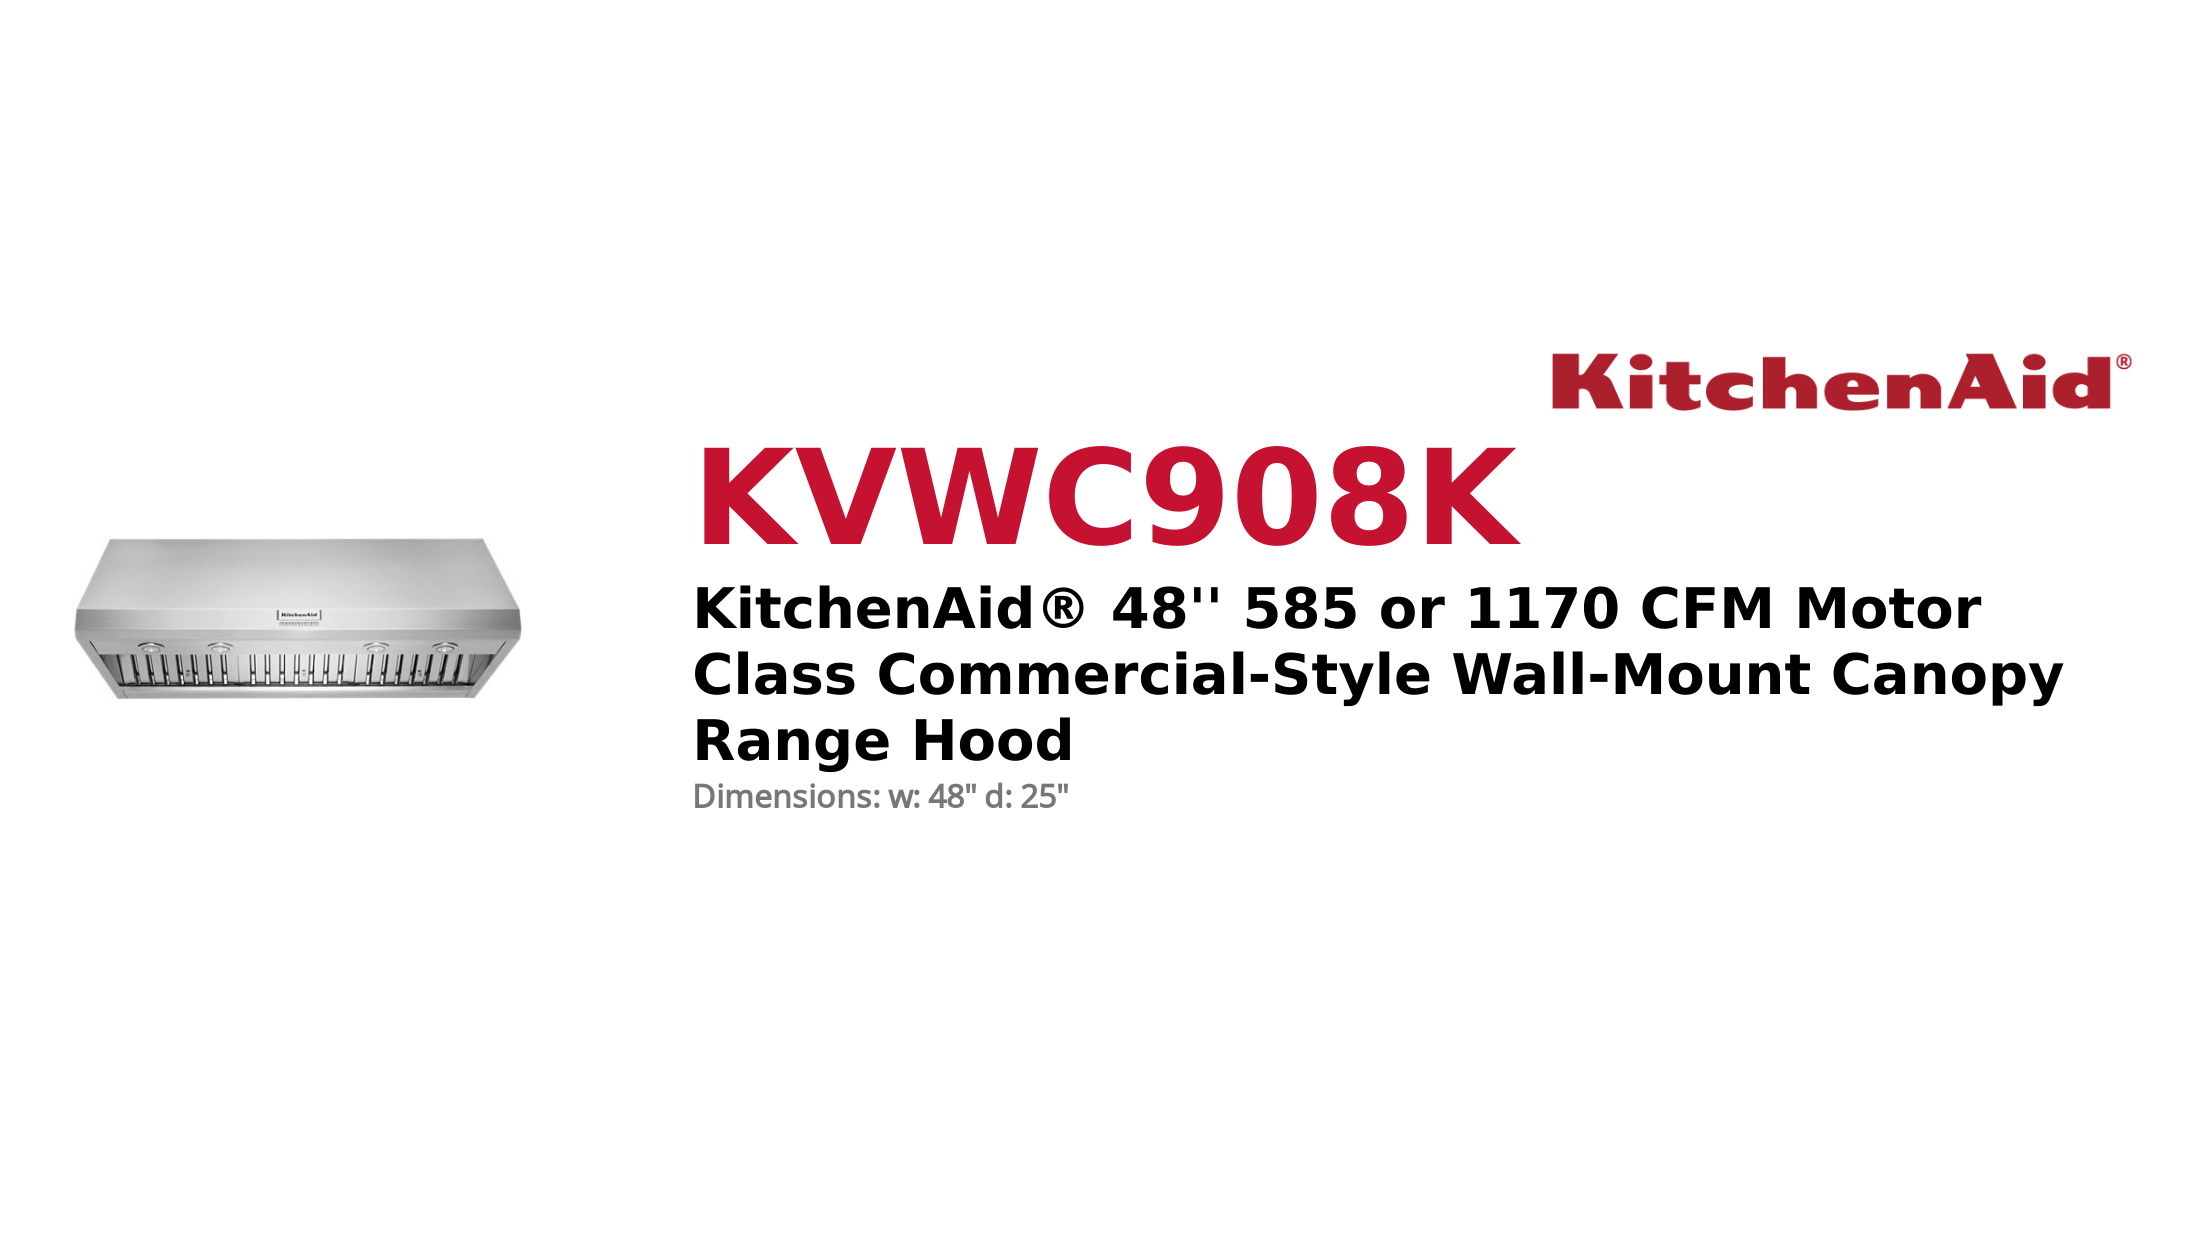 KitchenAid® 48 585 or 1170 CFM Motor Class Commercial-Style Wall-Mount Canopy Range Hood